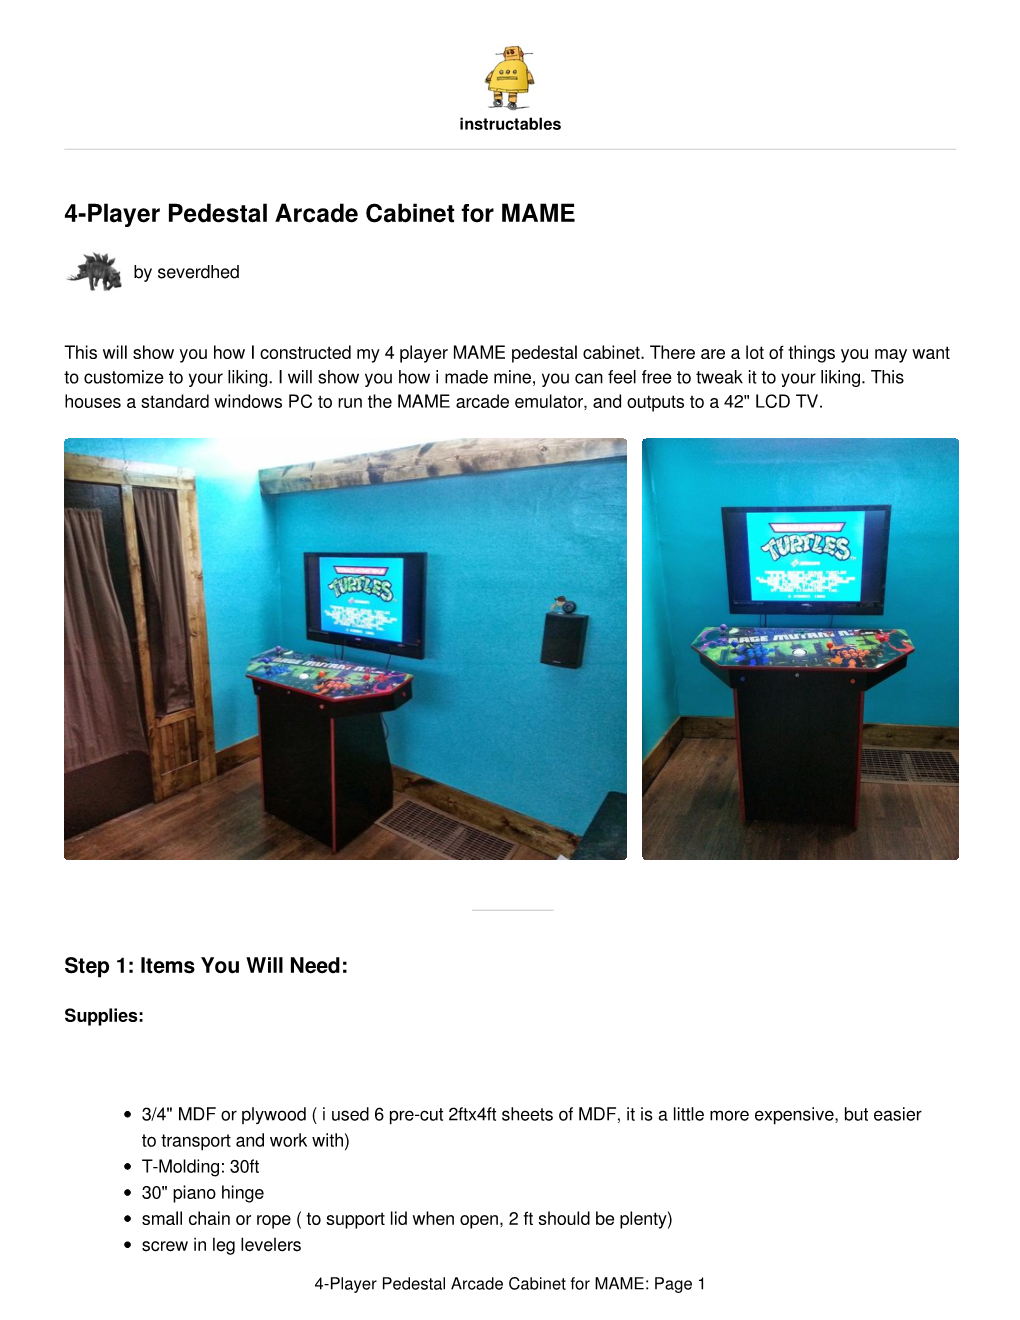 4-Player Pedestal Arcade Cabinet for MAME